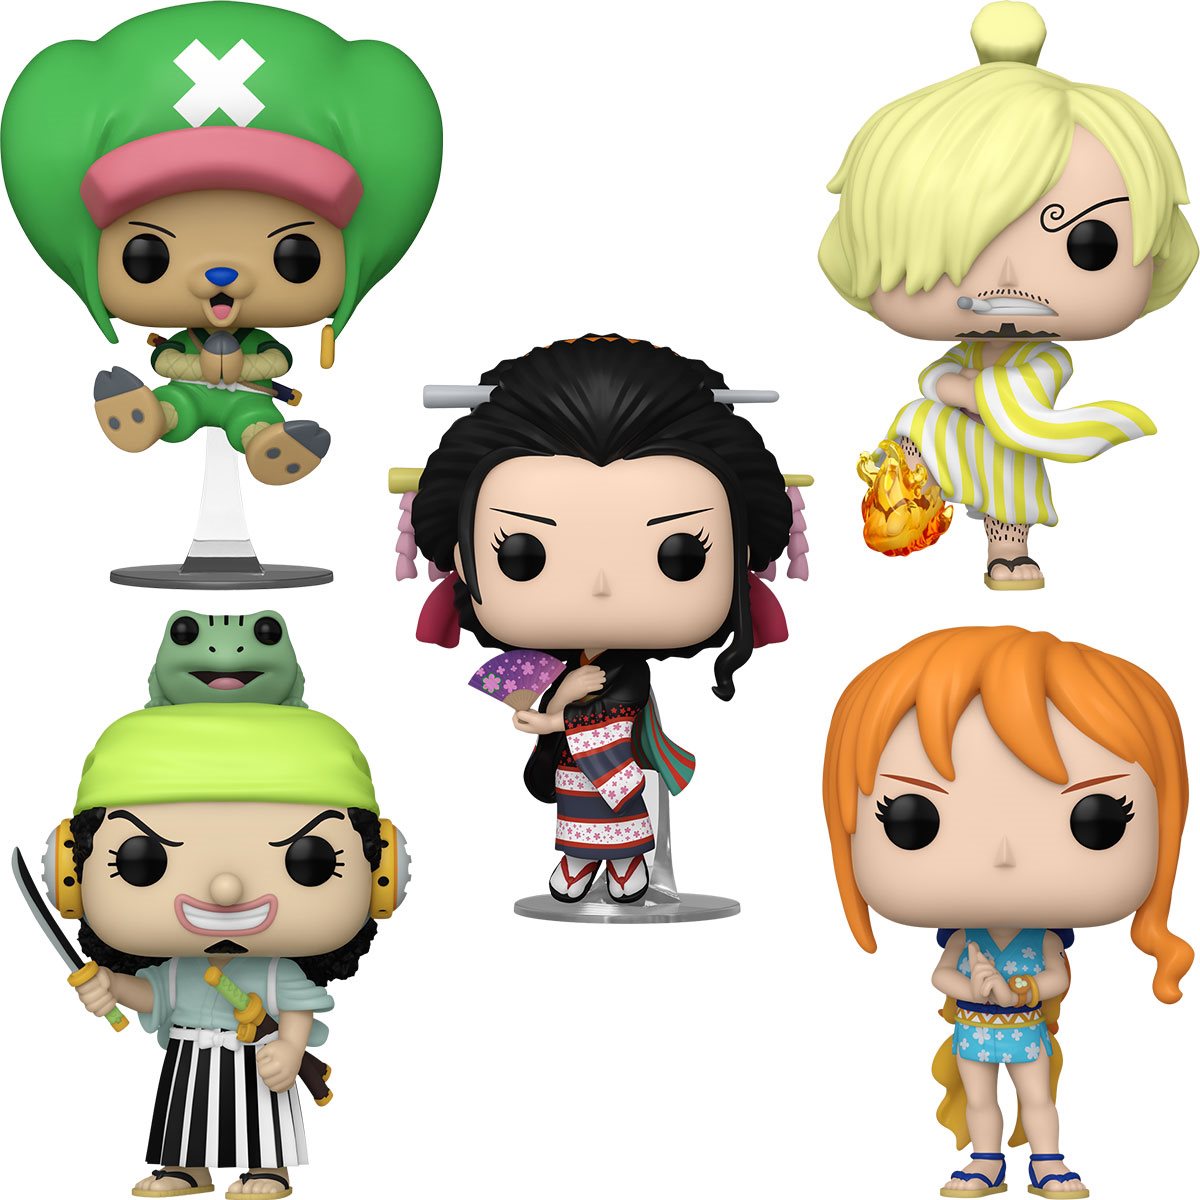 Funko Pop! One Piece Vinyl Figure Wave 7 Case of 5 with Protector Box